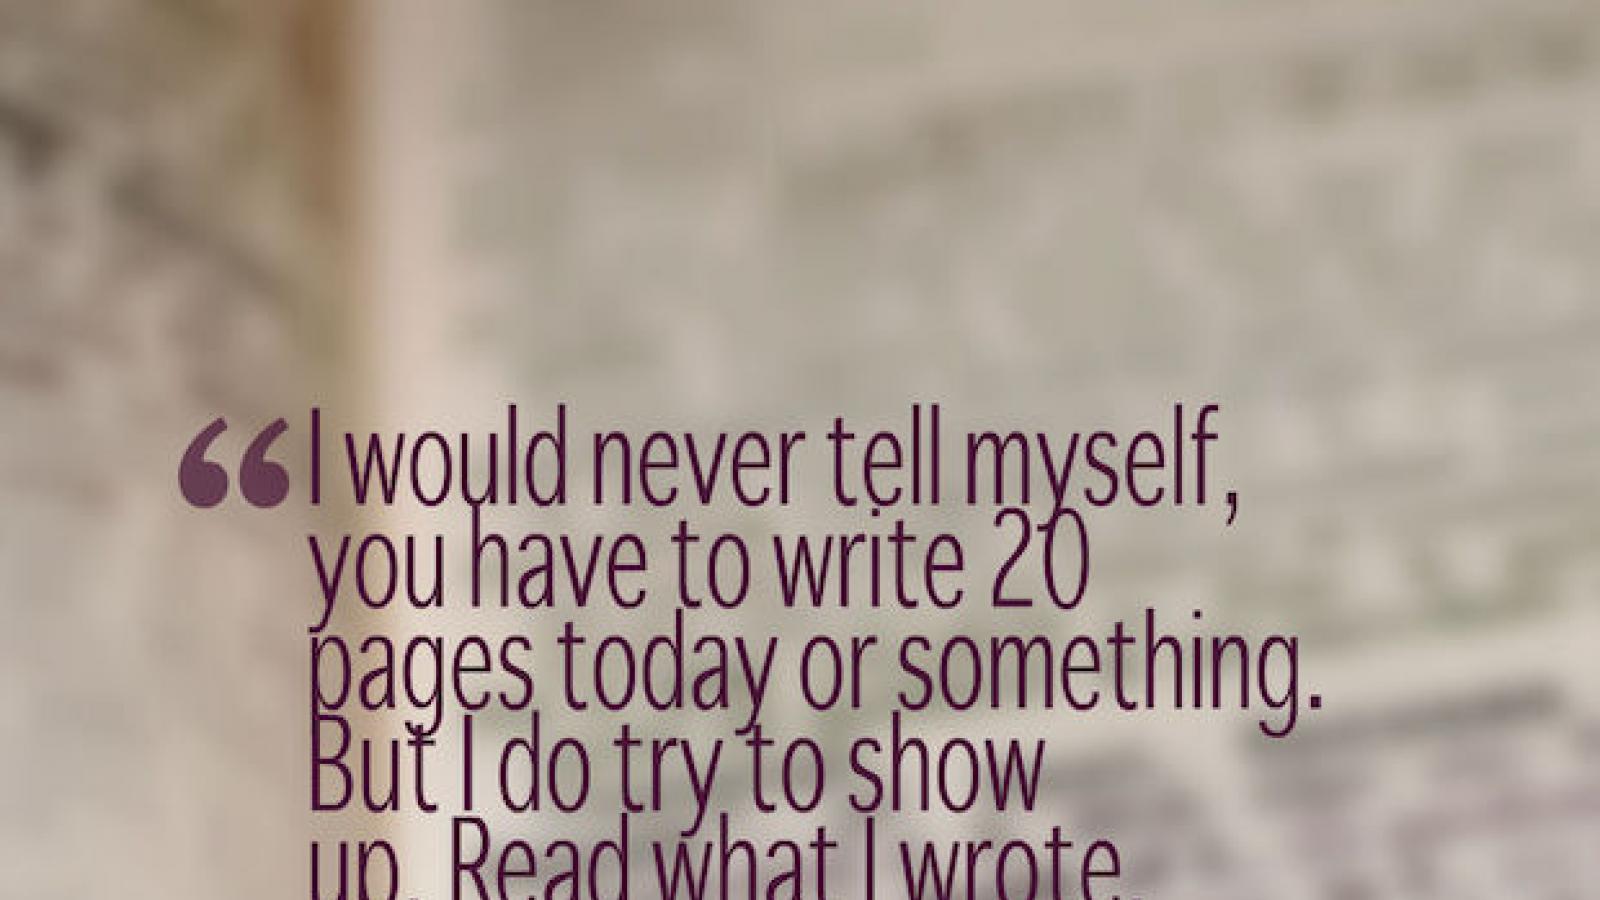 Graphic quote: I would never tell myself you have to write 20 pages today or something. But I do try to show up. Read what I wrote, fix things.